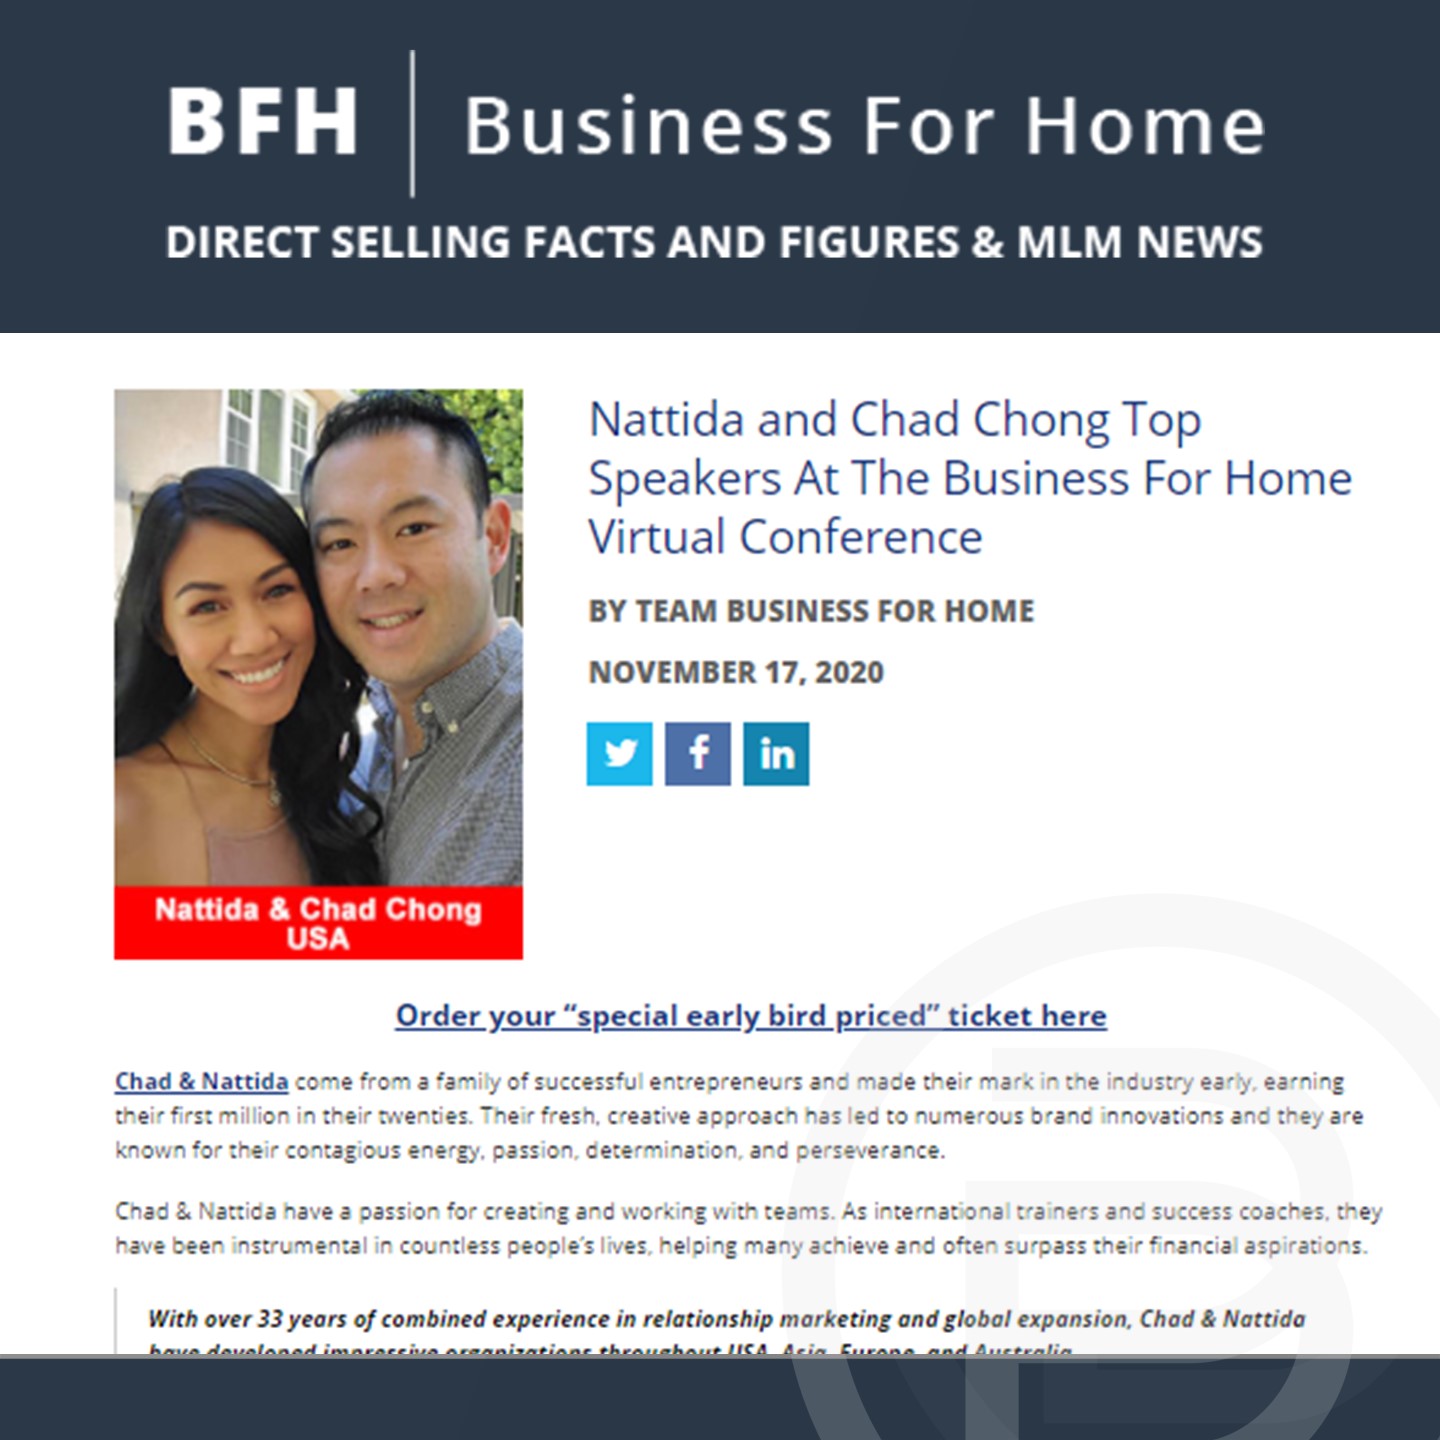 BFH: Nattida and Chad Chong Top Speakers At The Business For Home Virtual Conference